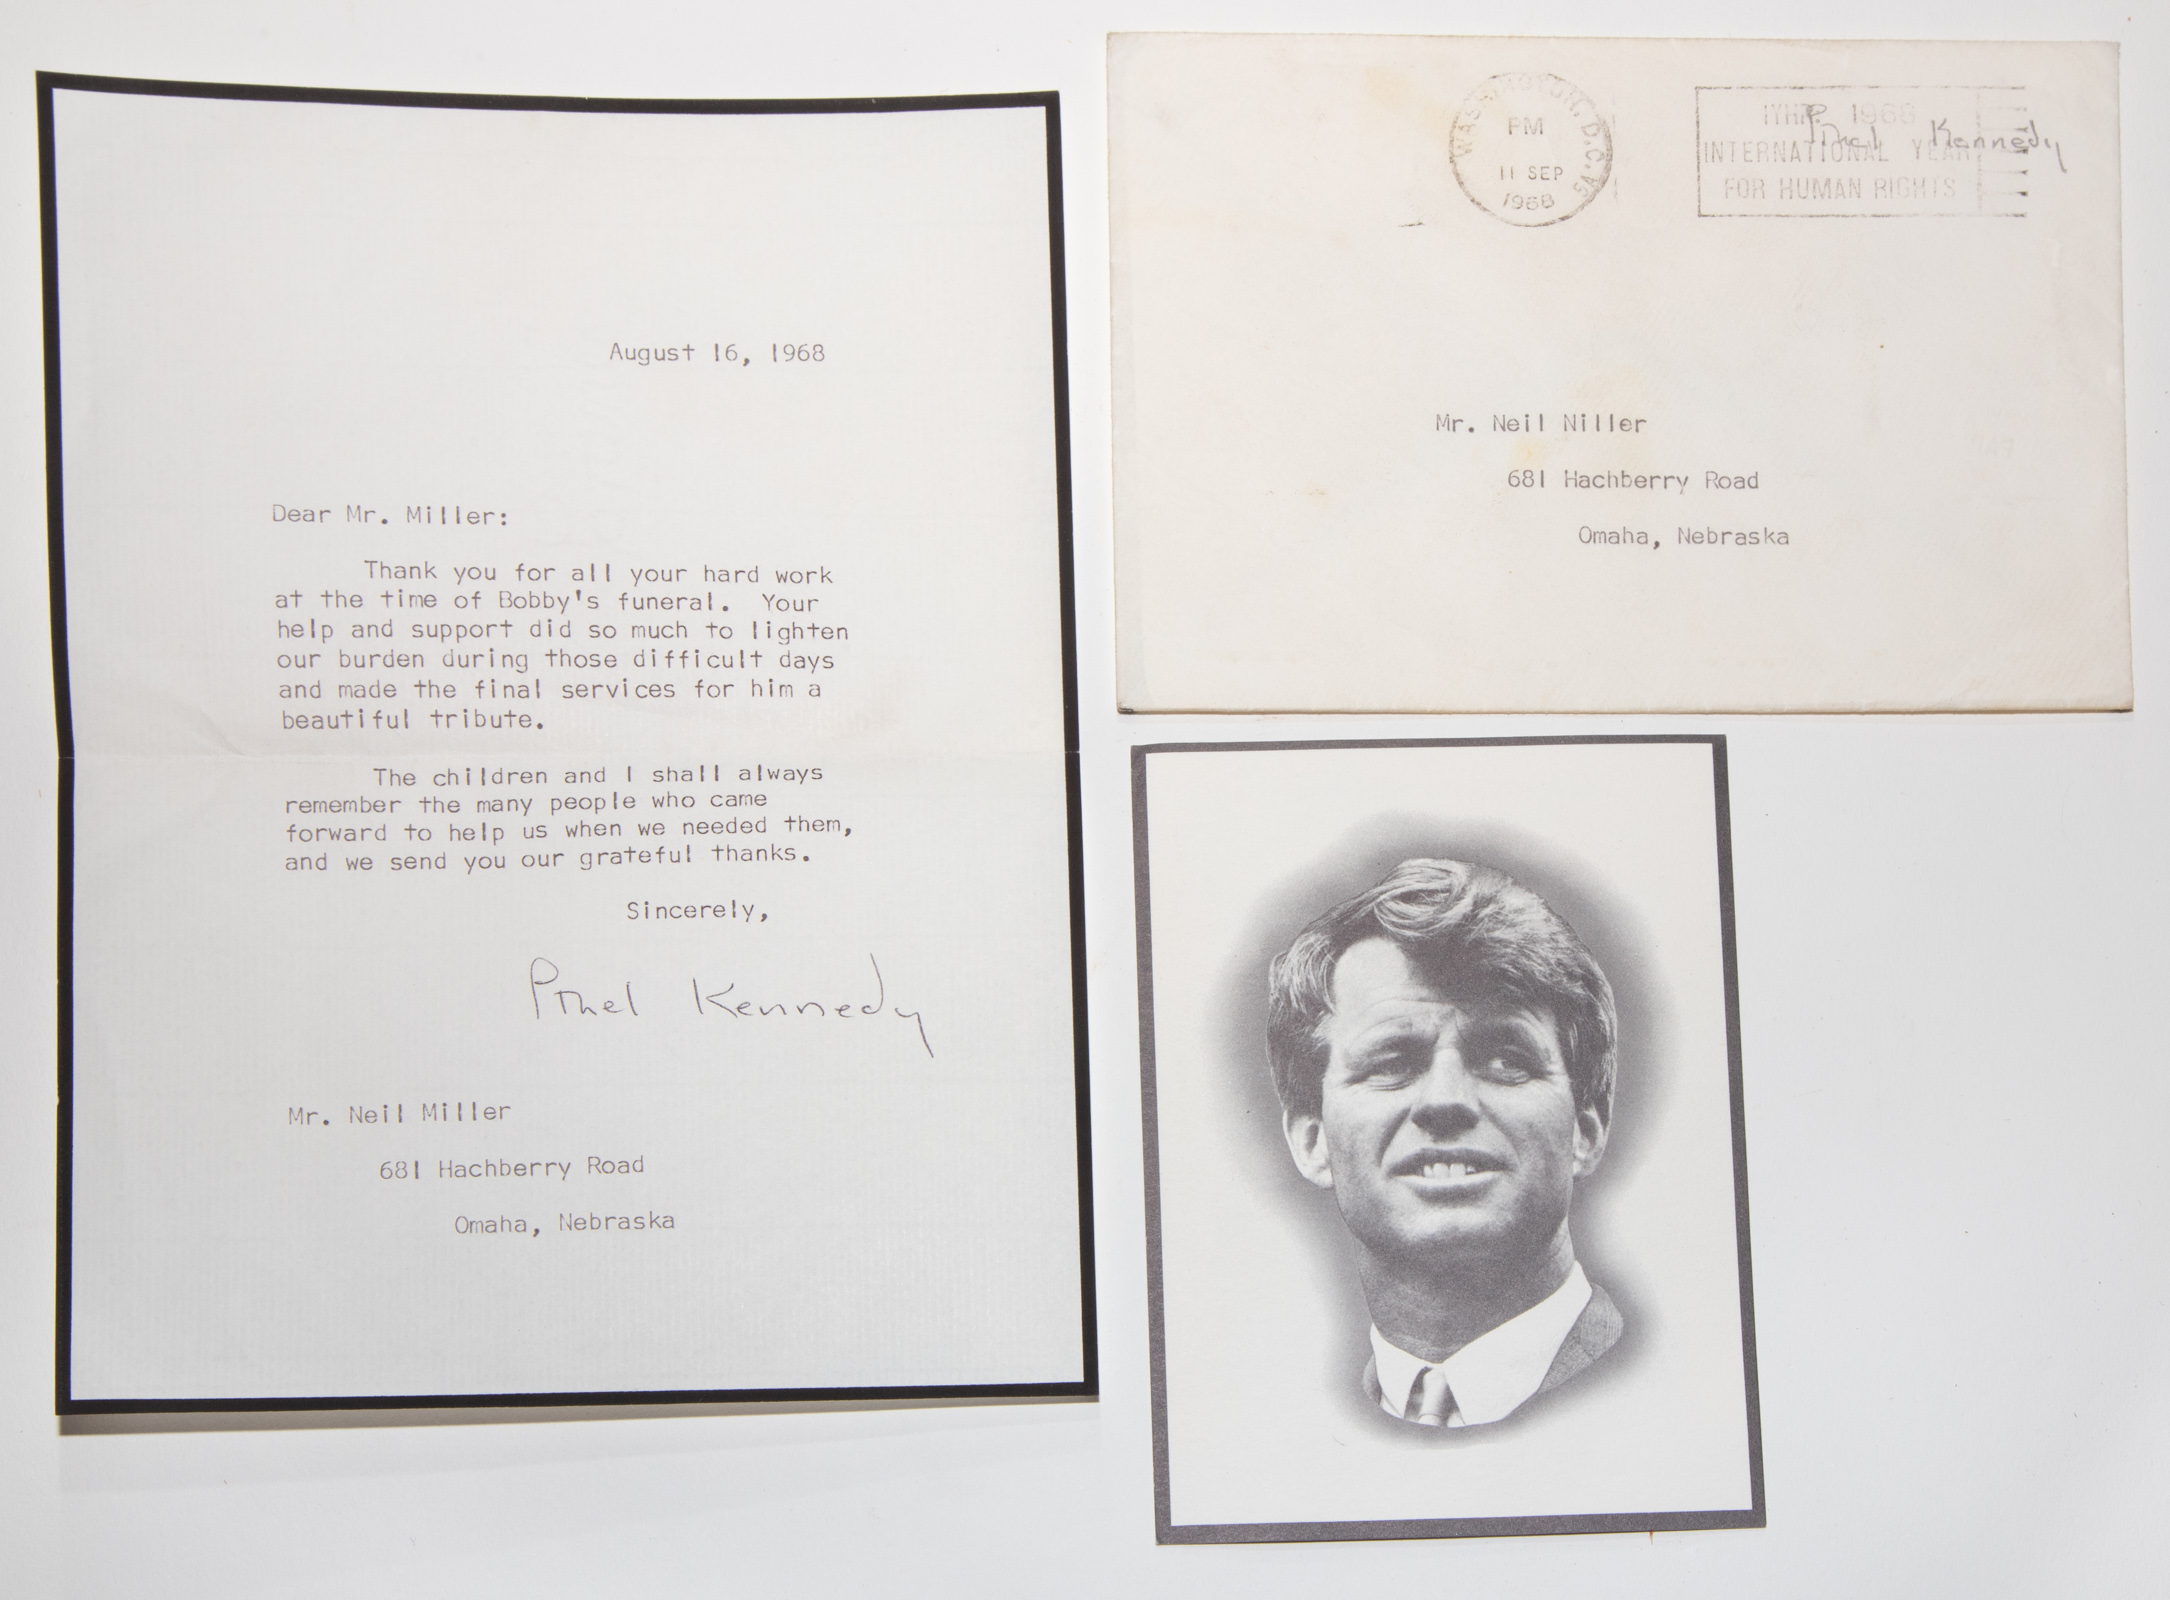 ETHEL KENNEDY TYPED NOTE SIGNED  33891f